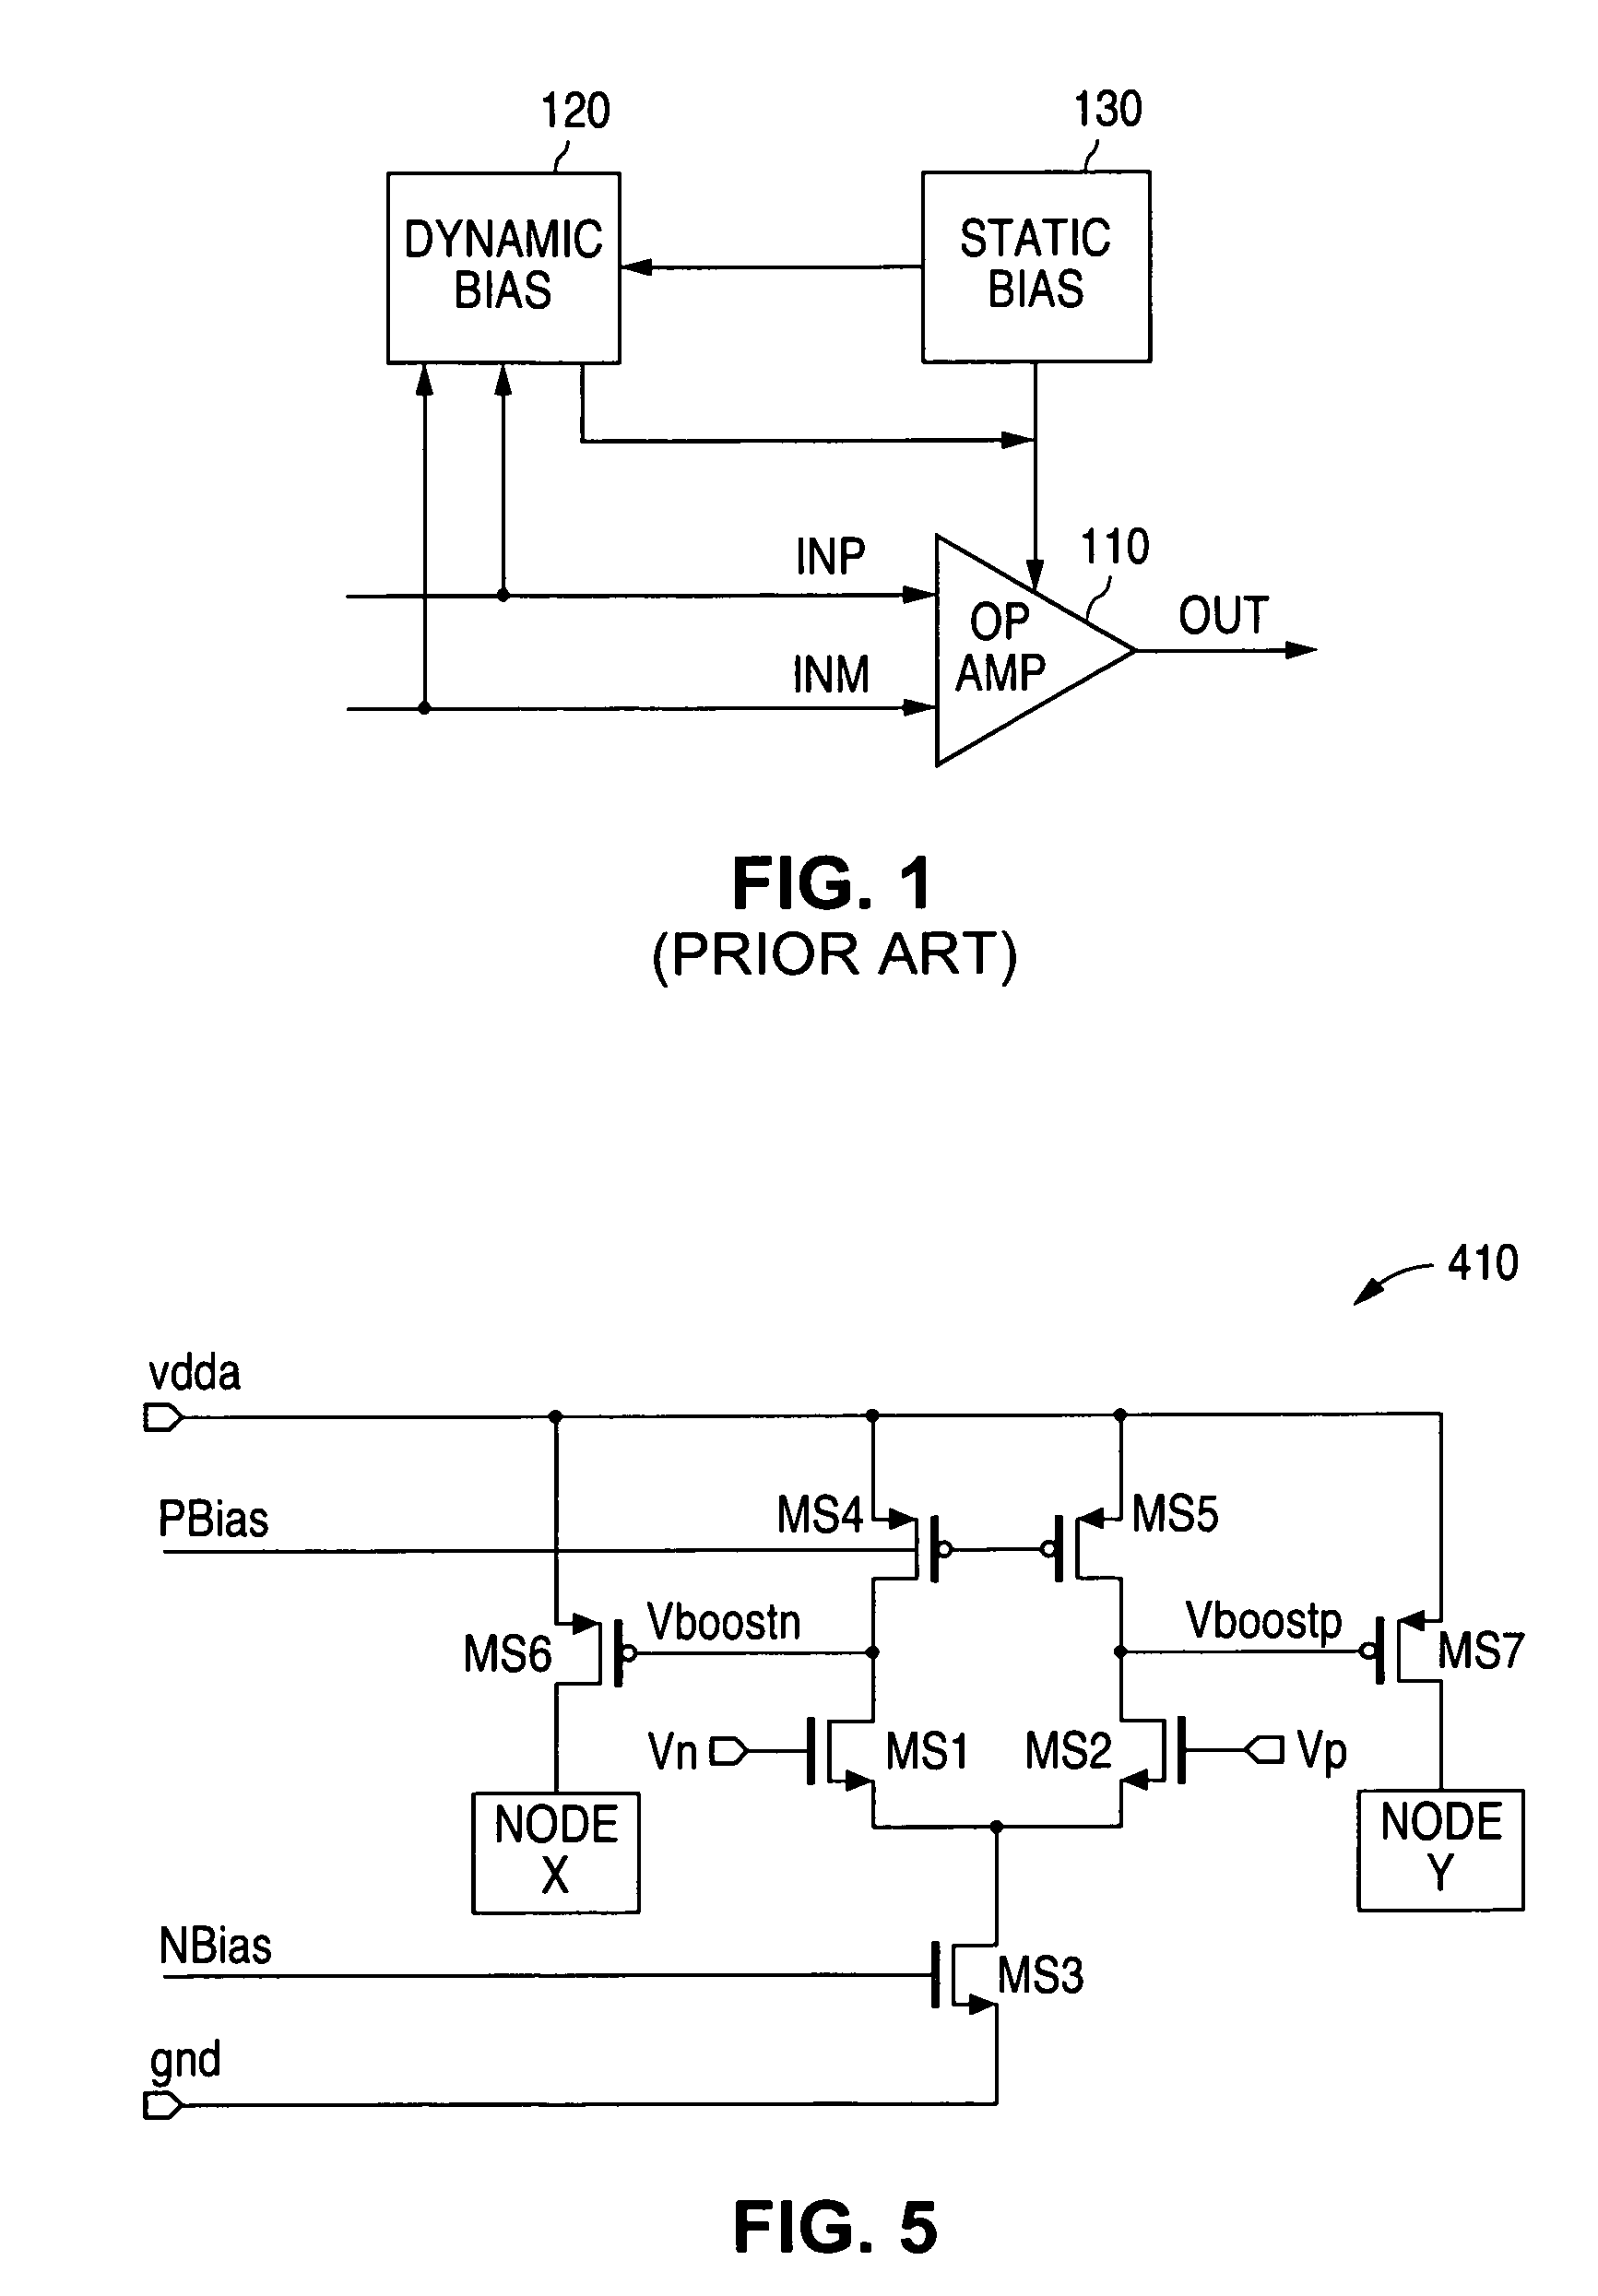 System and method for providing slew rate enhancement for two stage CMOS amplifiers